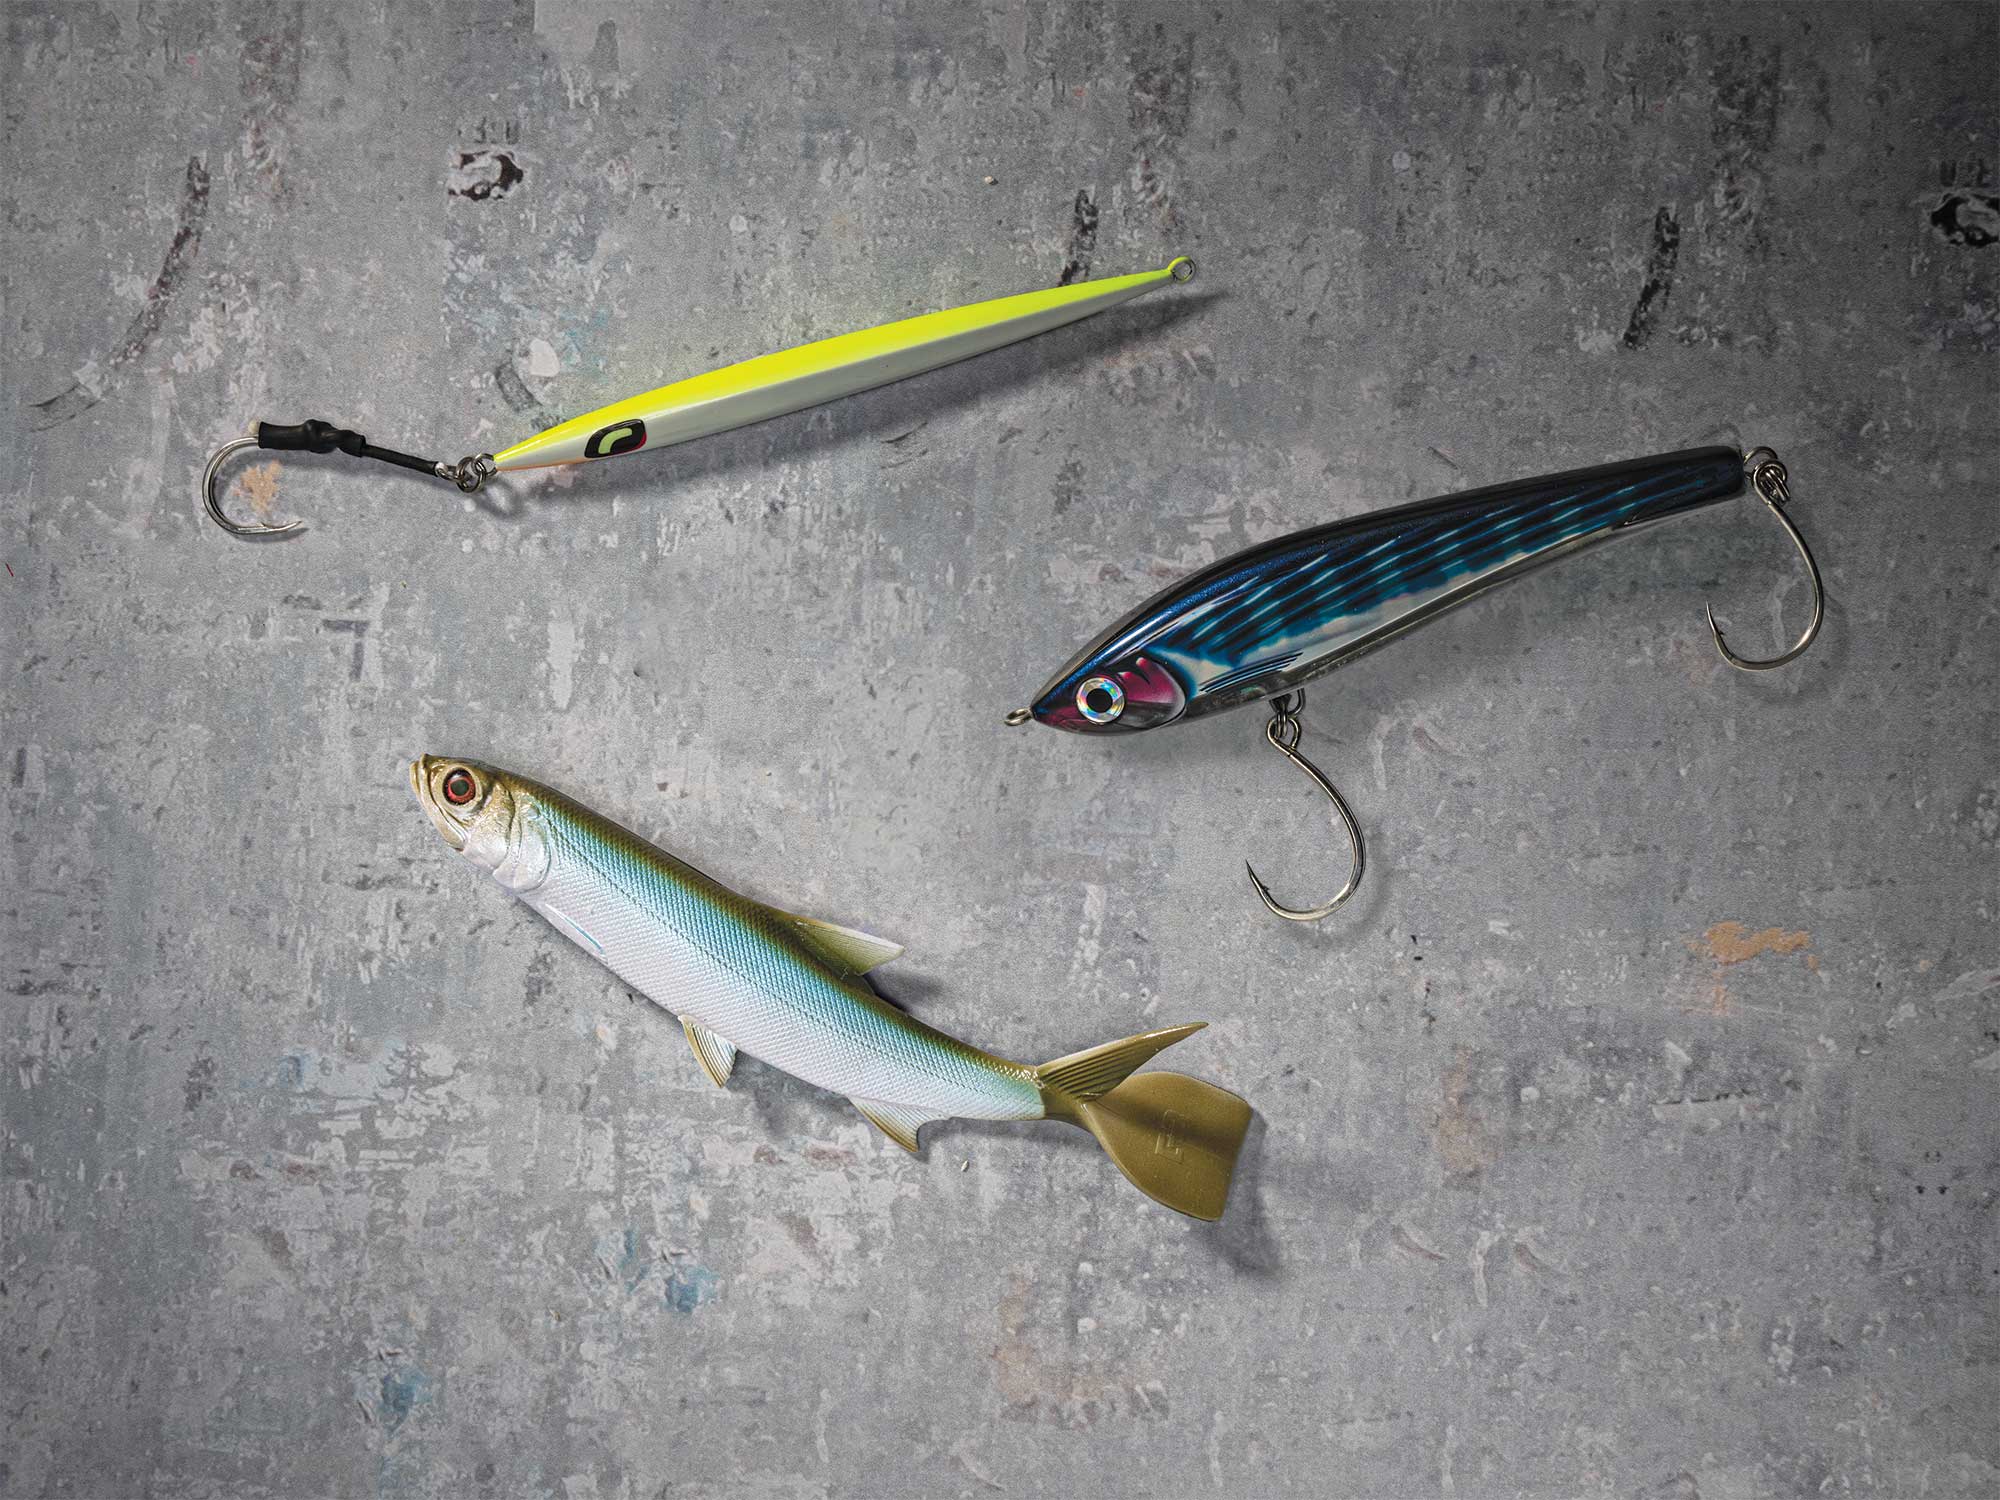 What's New with the Rapala Brands for 2022